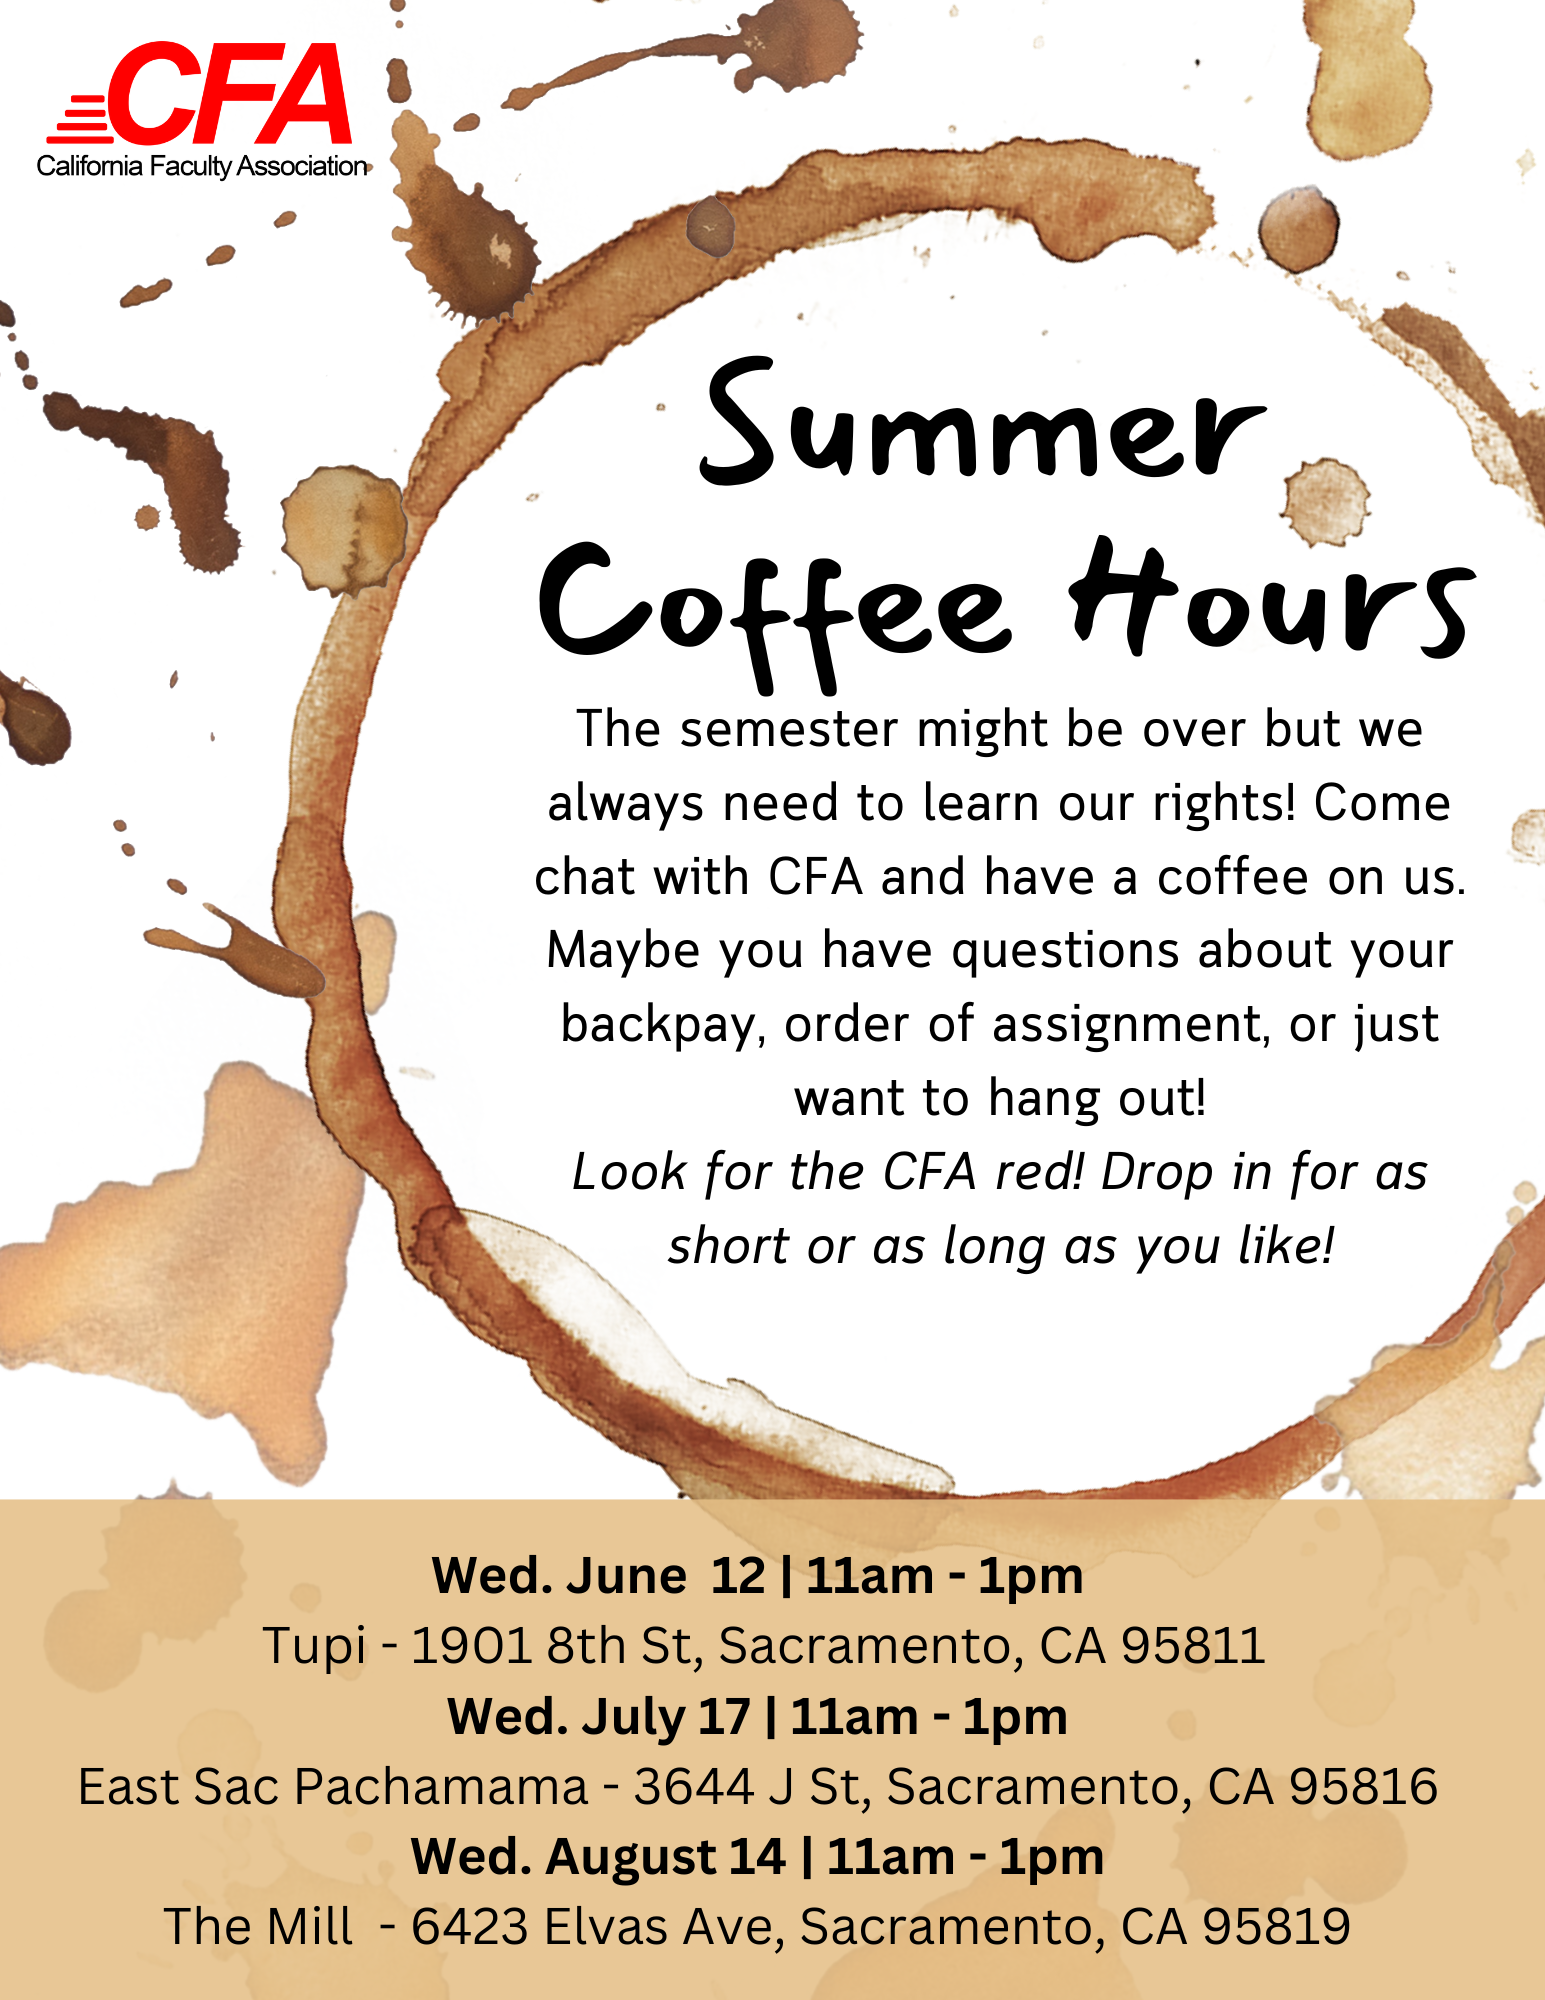 White flier with CFA Sacramento logo and coffee stains on the page. It reads: Summer Coffee Hours, The semester might be over but we always need to learn our rights! Come chat with CFA and have a coffee on us. Maybe you have questions about your backpay, order of assignment, or just want to hang out! Look for the CFA red! Drop in for as short or as long as you like! Wed. June 12 | 11am - 1pm Tupi - 1901 8th St, Sacramento, CA 95811 Wed. July 17 | 11am - 1pm. East Sac Pachamama - 3644 J St, Sacramento, CA 95816 Wed. August 14 | 11am - 1pm. The Mill - 6423 Elvas Ave, Sacramento, CA 95819.